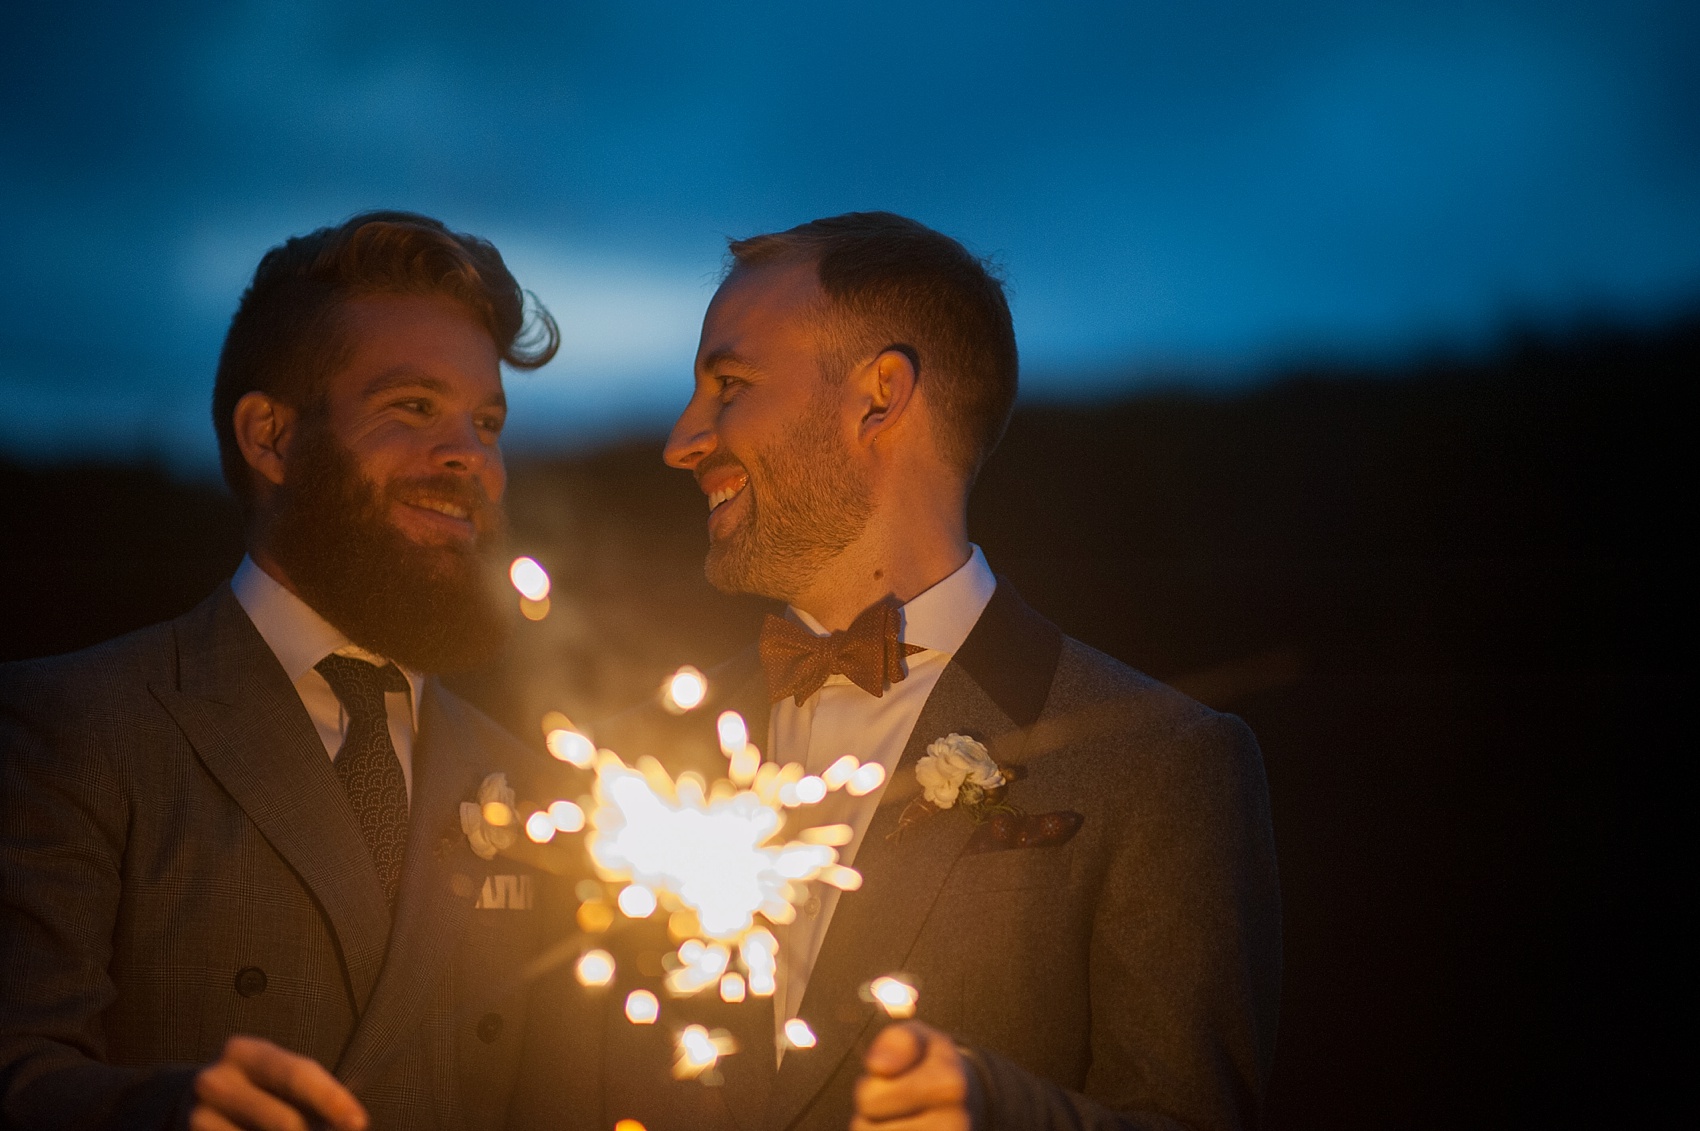 Fourth of July wedding - sparkler photo ideas by Mikkel Paige Photography, Raleigh wedding photographer.